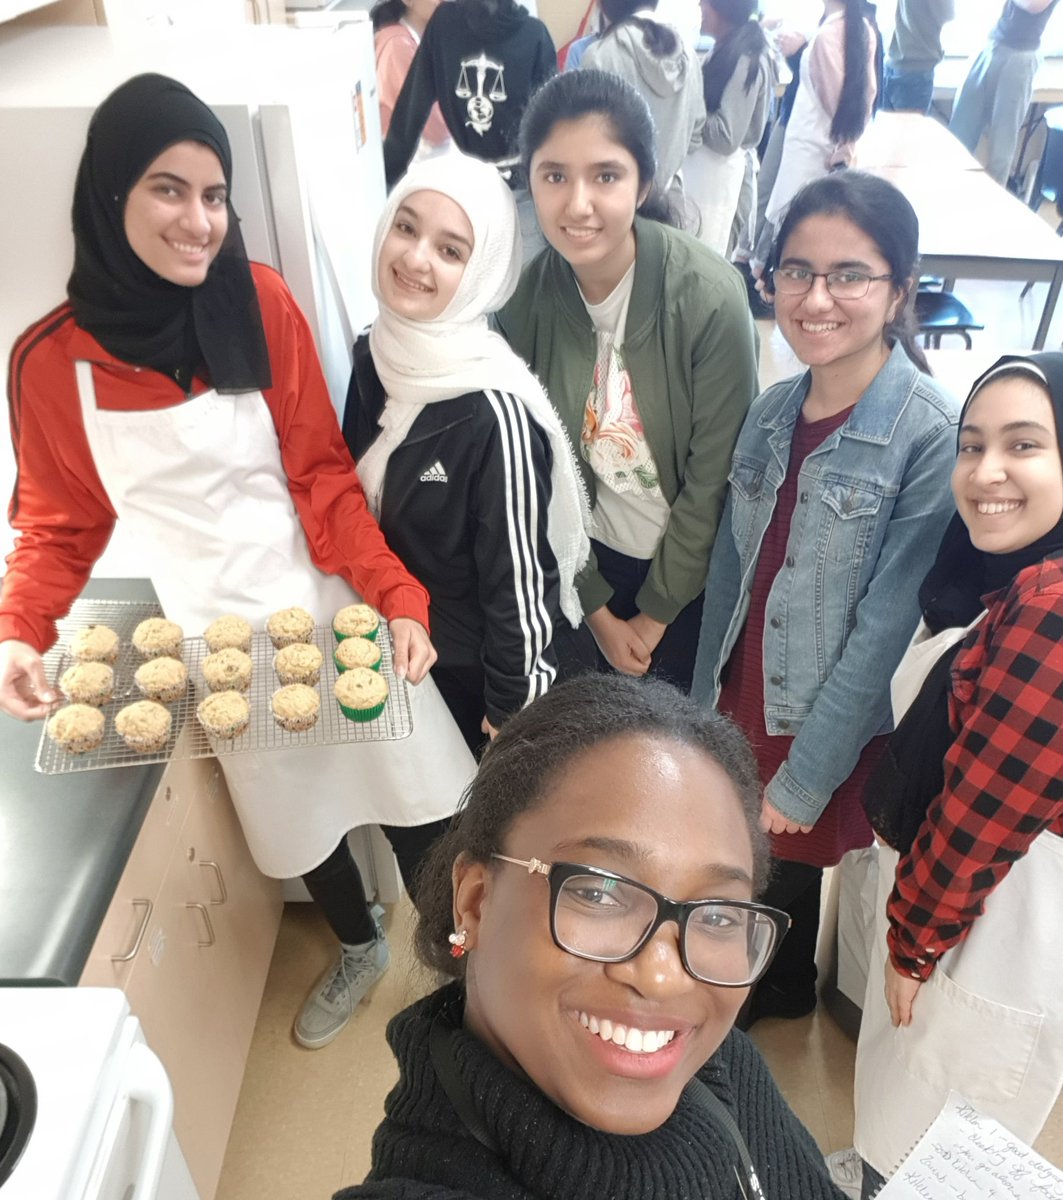 Apple Carrot Oatmeal Cranberry Muffins🧁...oh yes😏🔥 So good, we had to take a selfie 😁 #morningglorymuffins #breakfastfood #nutritionandhealth #grade12 @SLSSPeel @PeelSchools @OFSHEEA